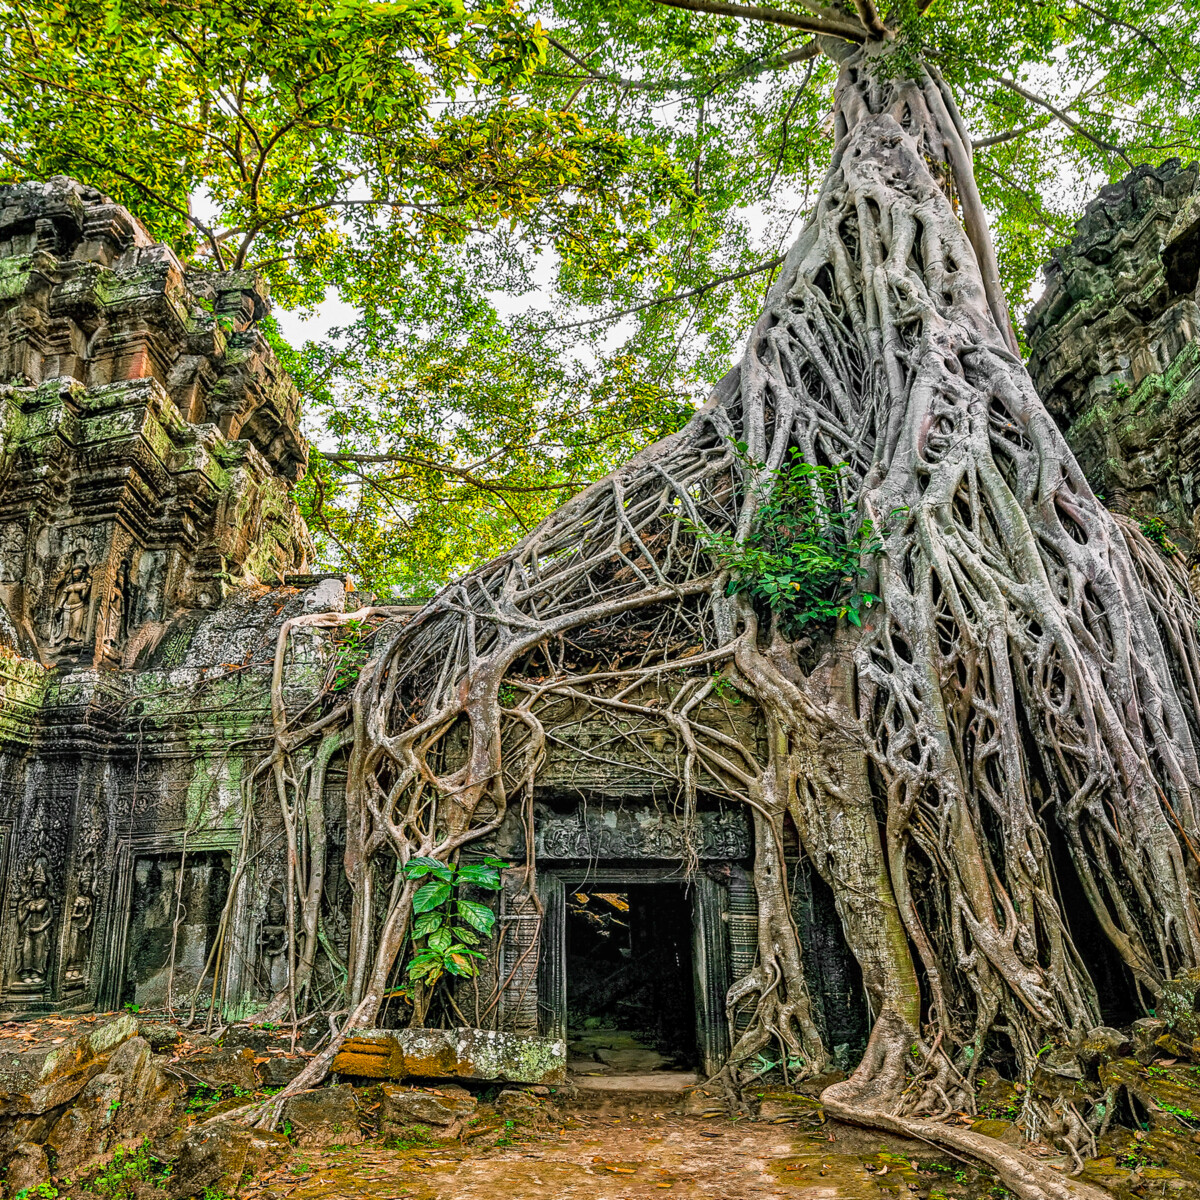 Ta Prohm (Tomb Raider) Temple is a must-see and another one of the great insider tips to Siem Reap.